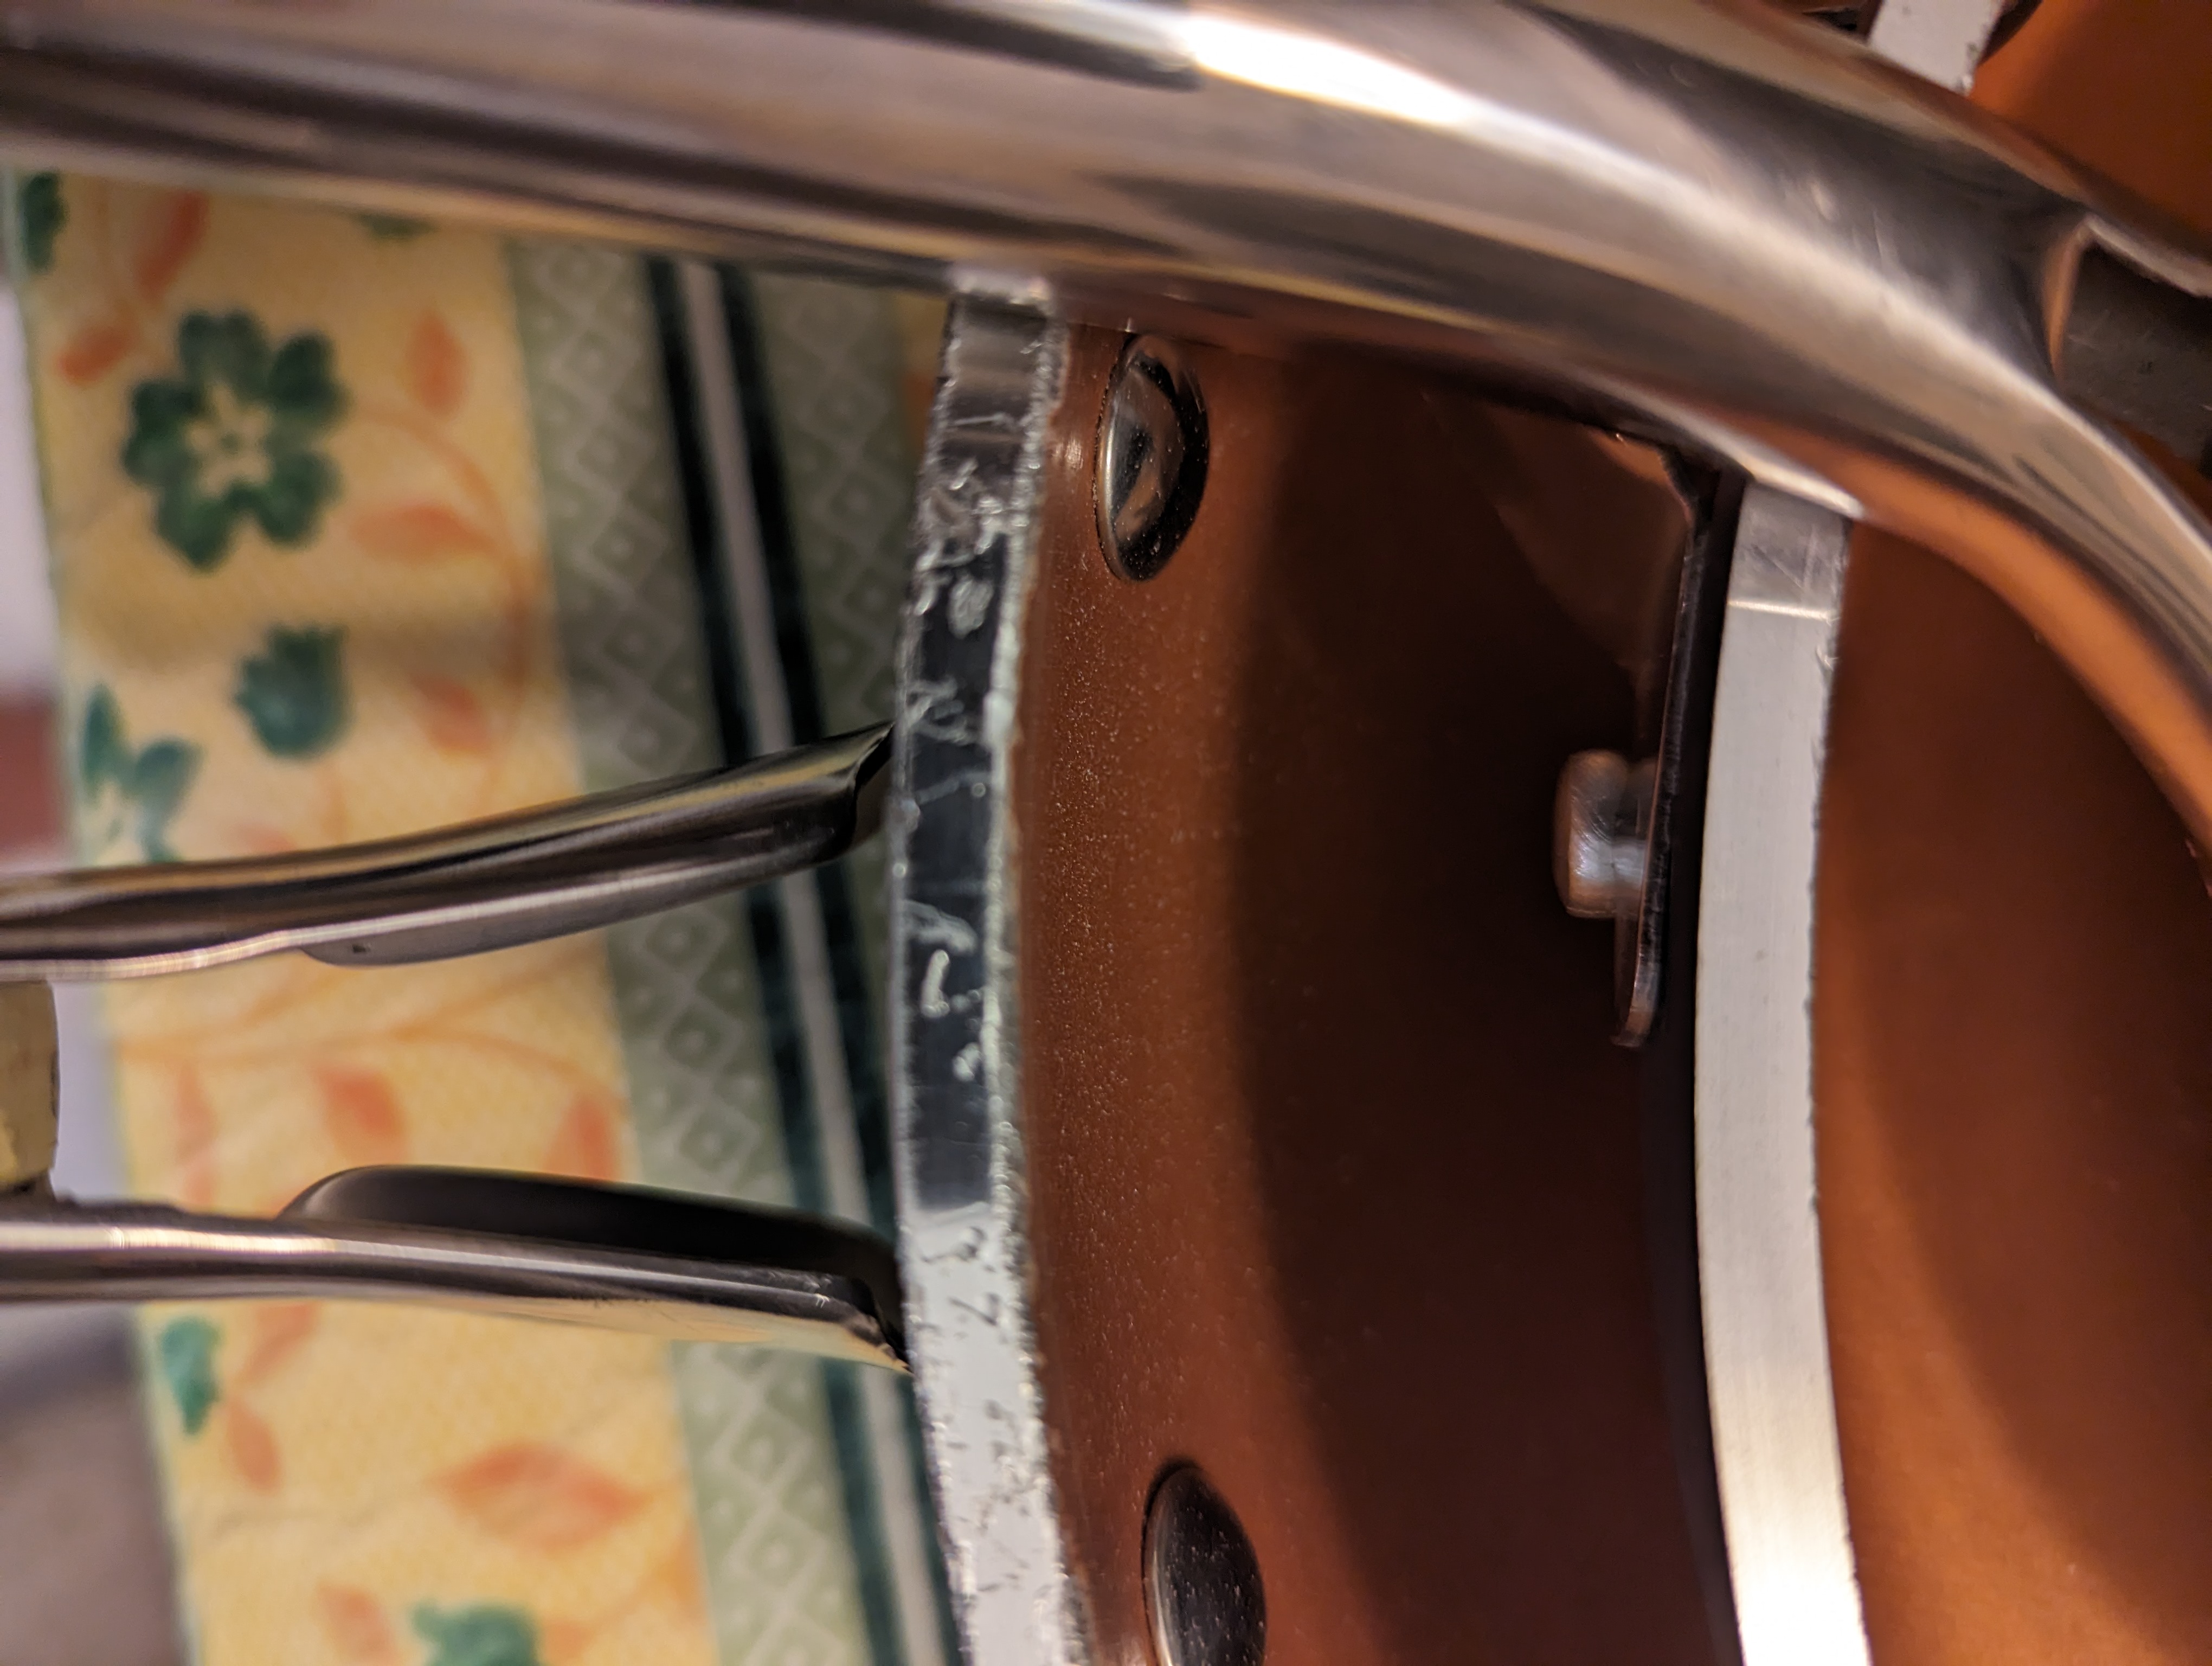 Gotham Steel Pans Review » LeelaLicious